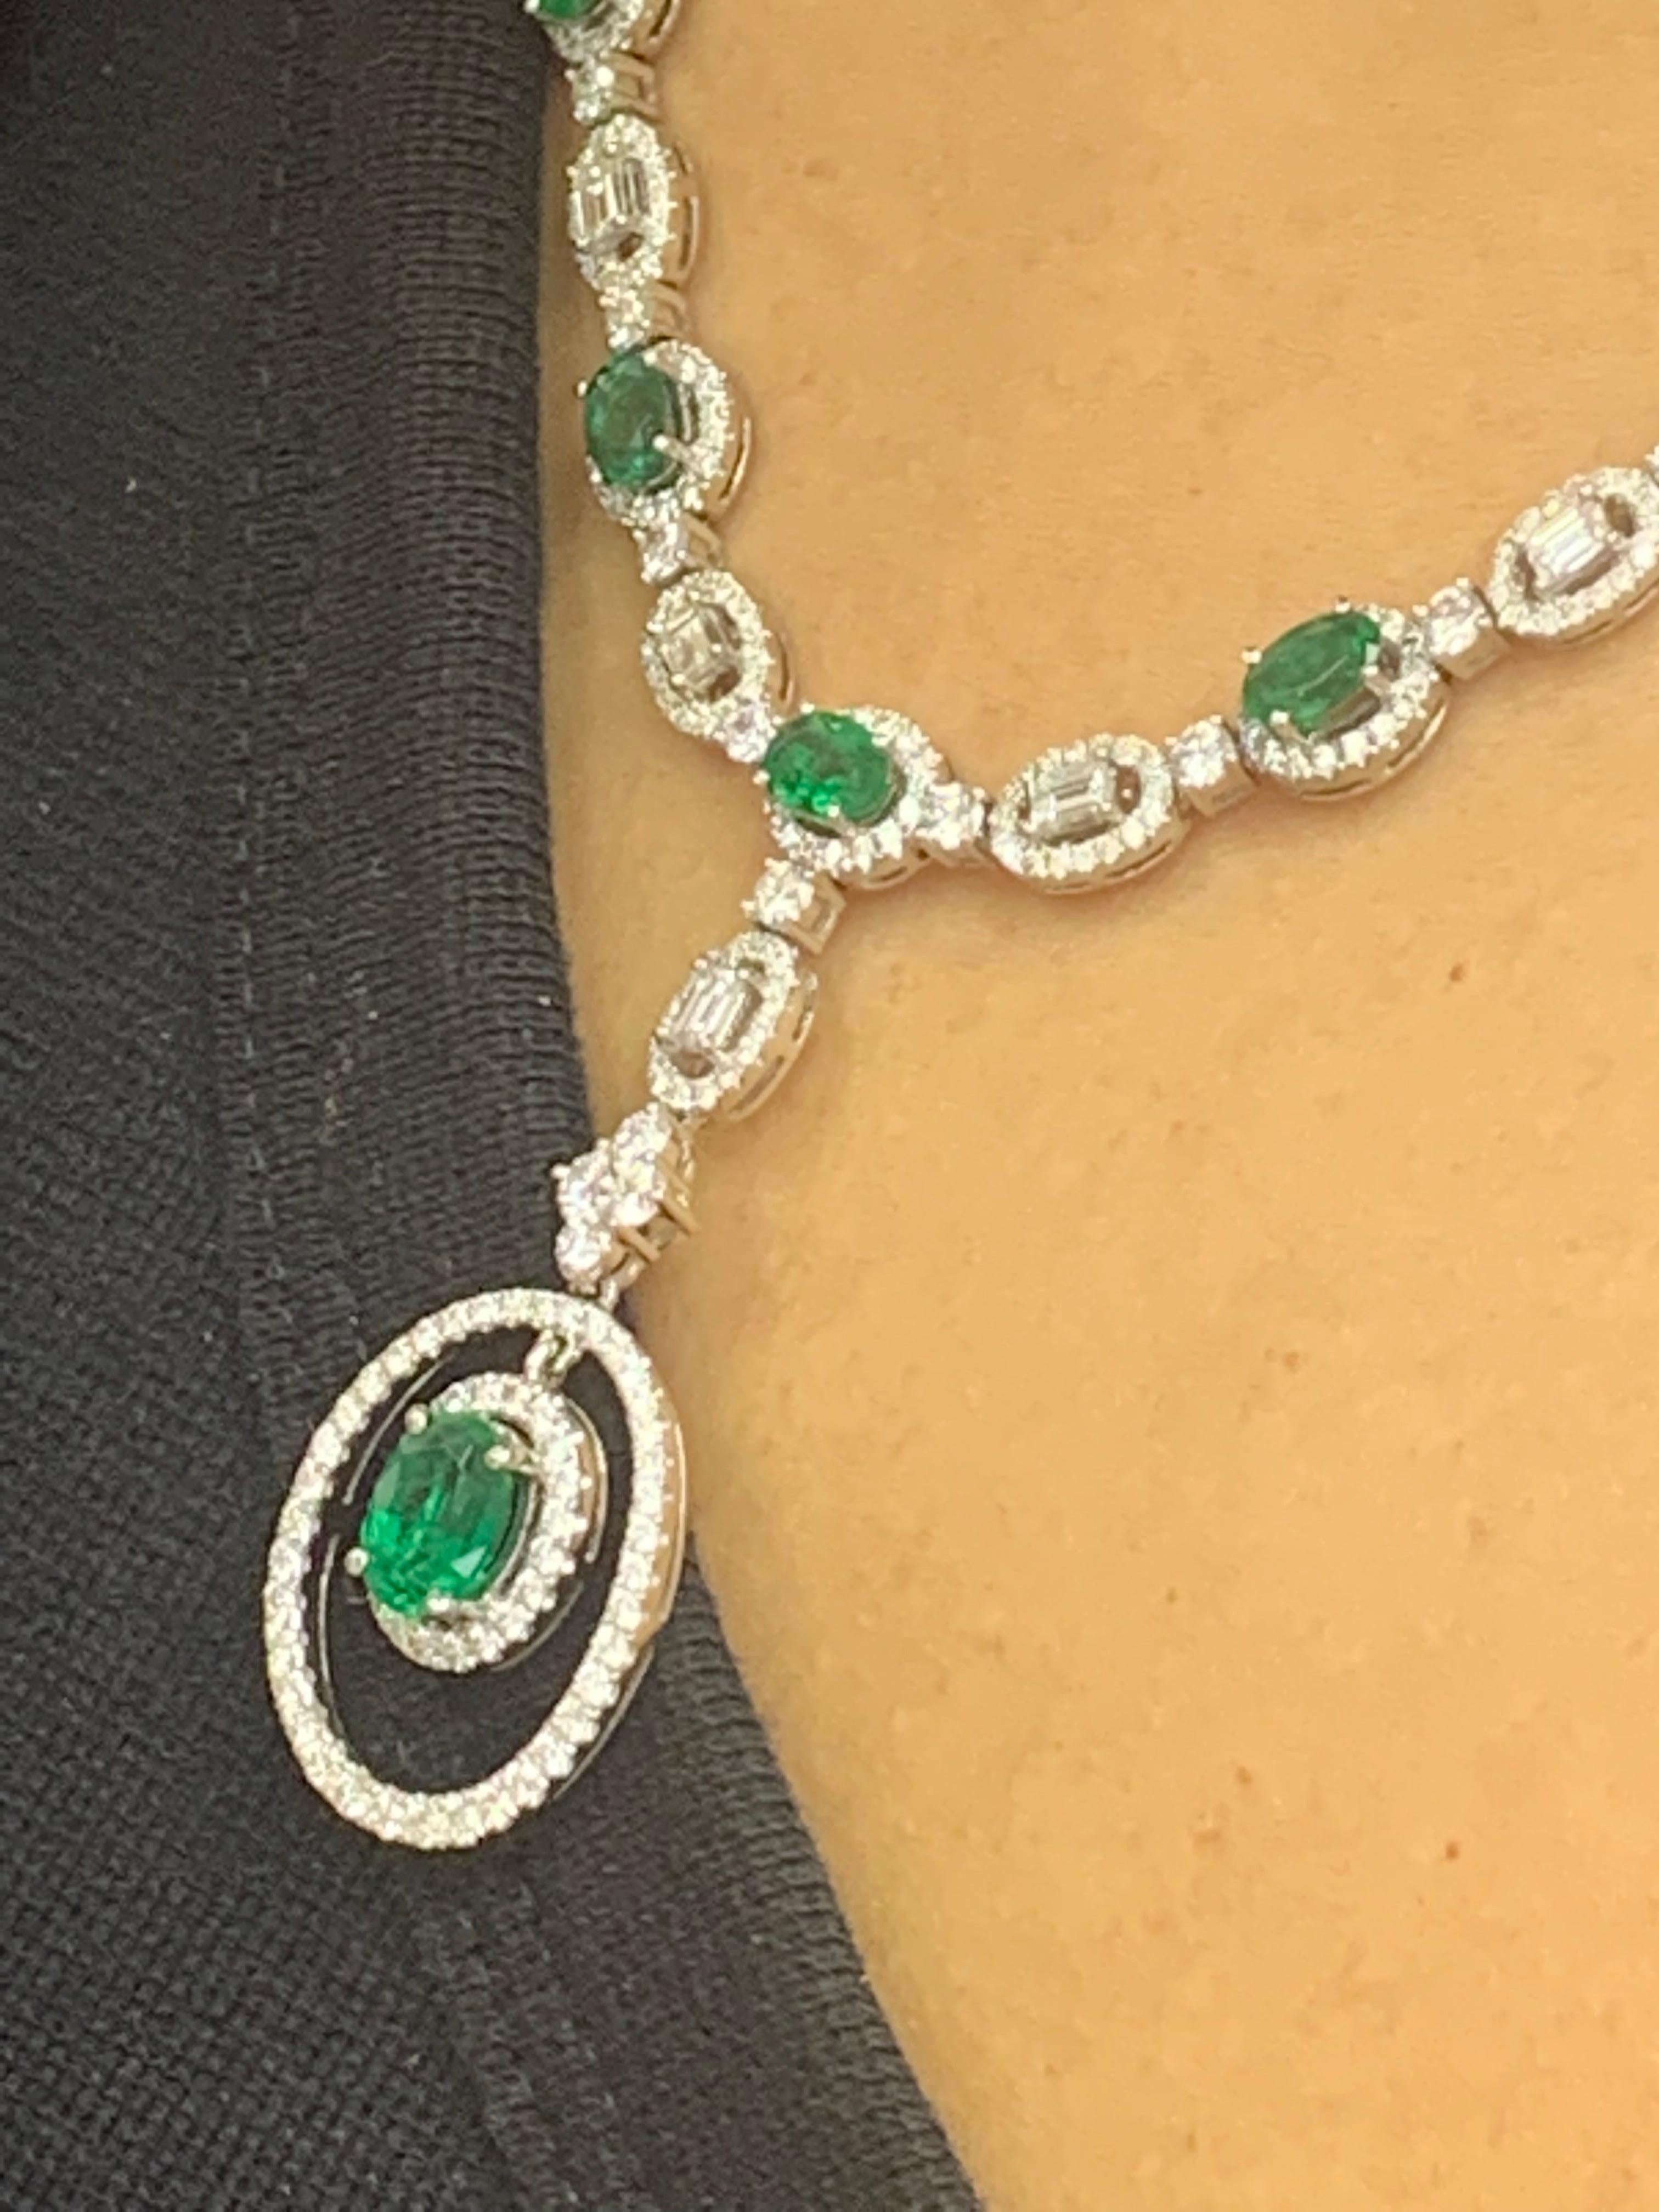 4.21 Carat Oval Cut Emerald and Diamond Necklace in 18 White Gold For Sale 2